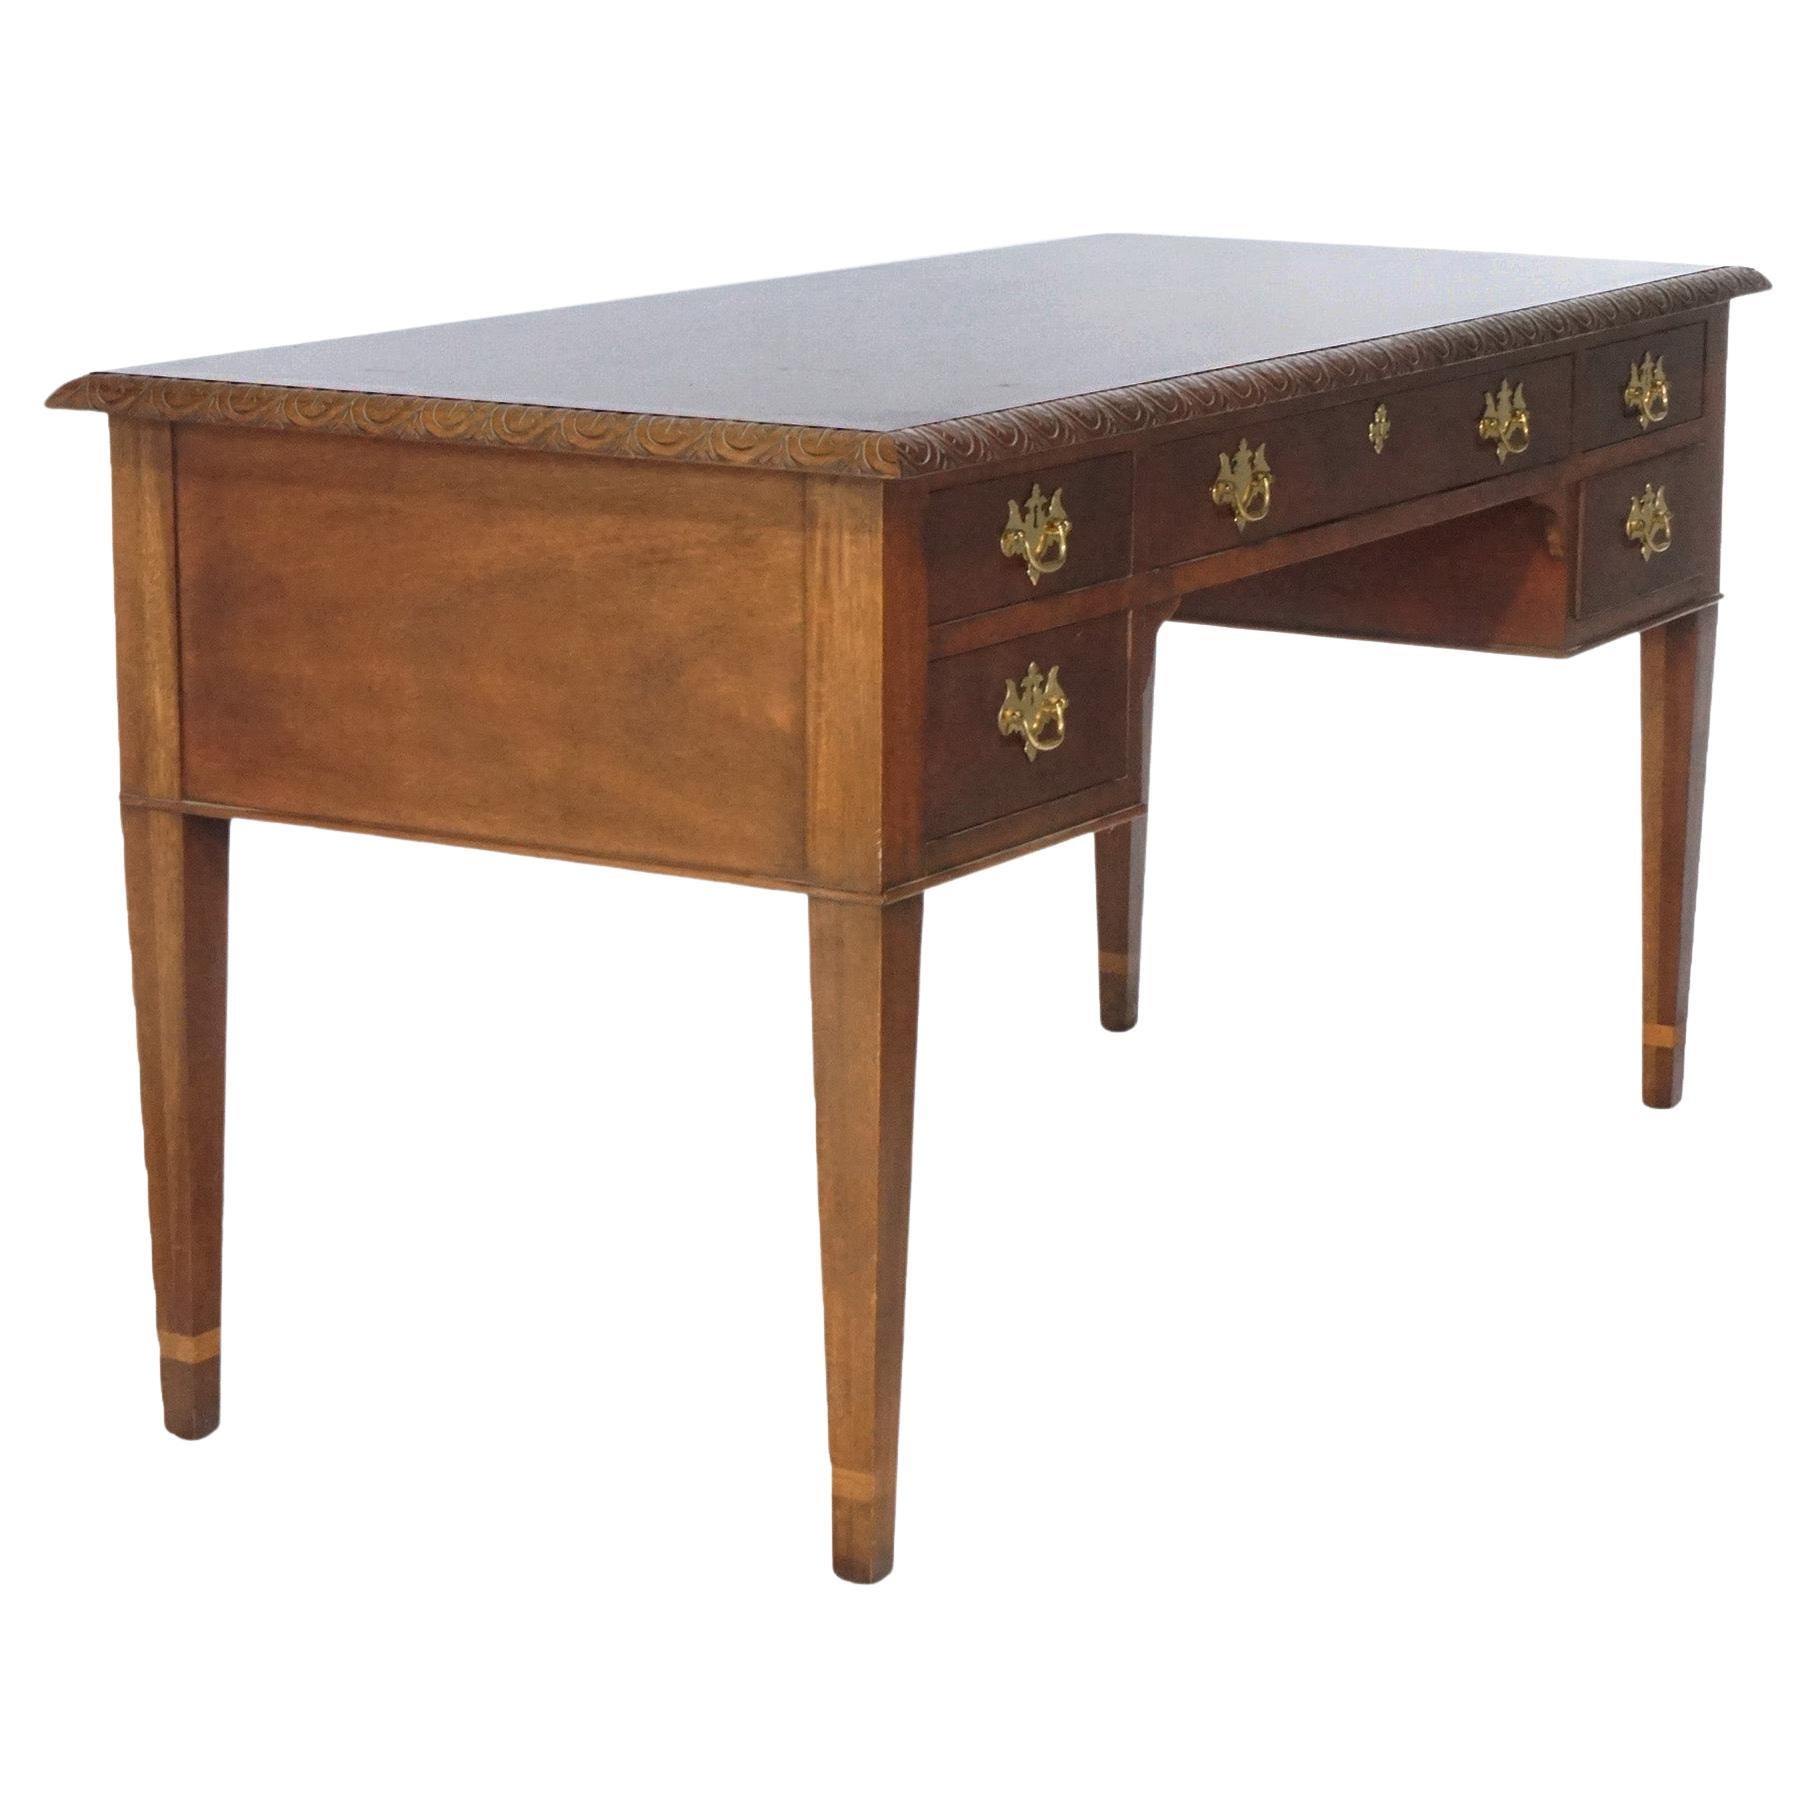 A Hepplewhite style kneehole desk of the Historic Charleston Collection by Baker offers mahogany construction with top having decorated trimming over single central drawer with flanking drawer towers, raised on straight and tapered legs with